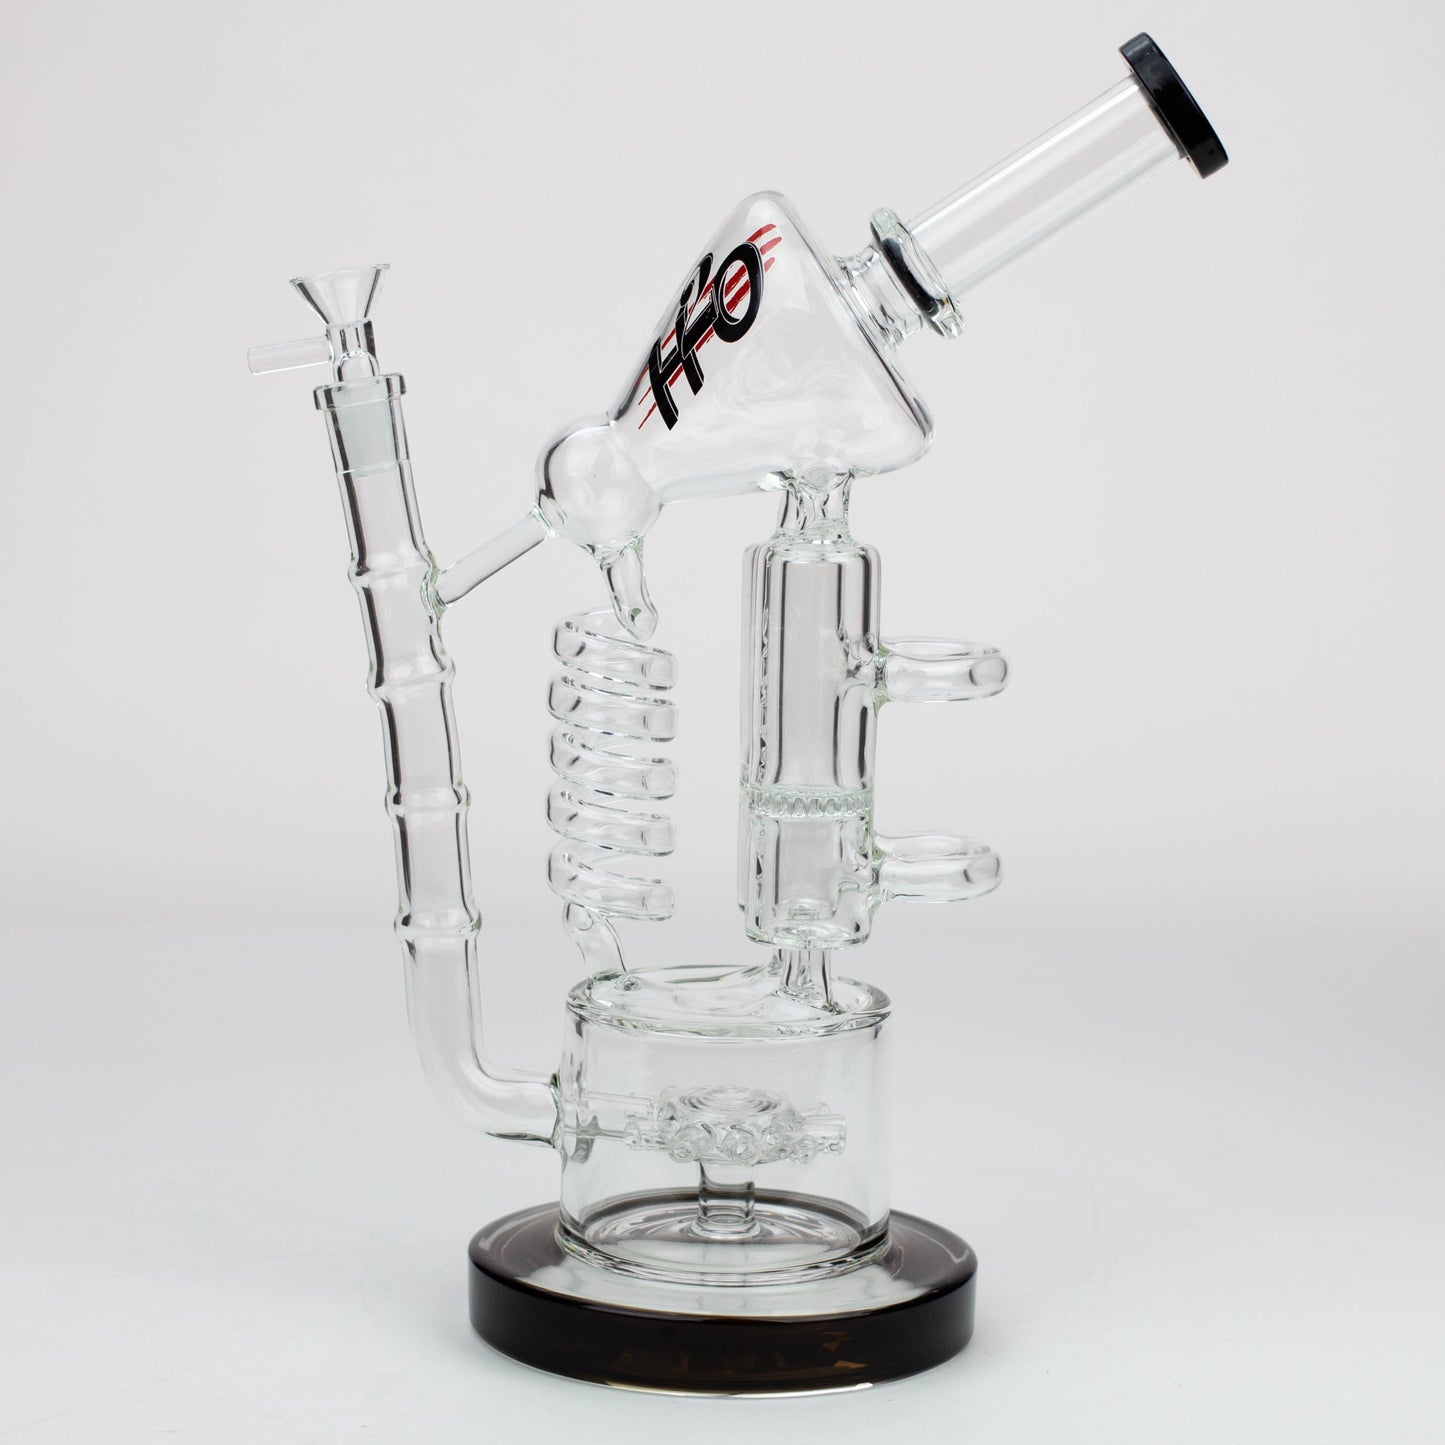 12" H2O Coil Glass water recycle bong_6